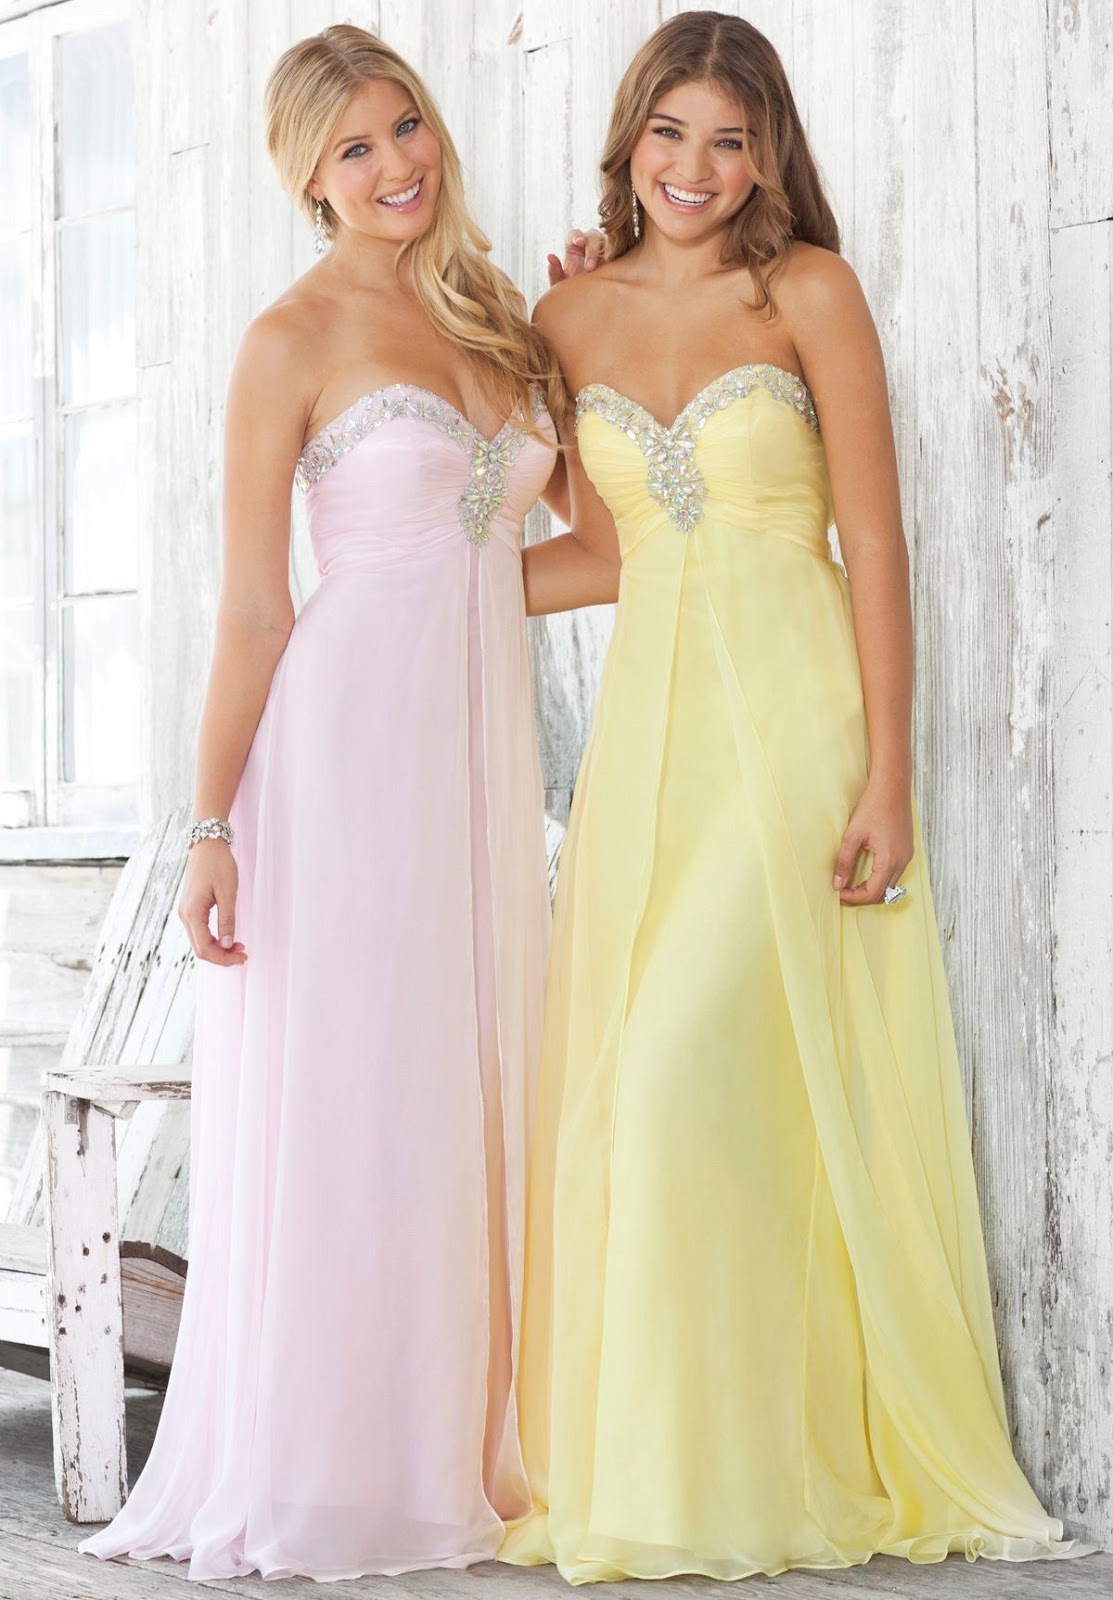 Prom Dresses Fashion For Party: How to Look Absolutely Stunning In Your ...